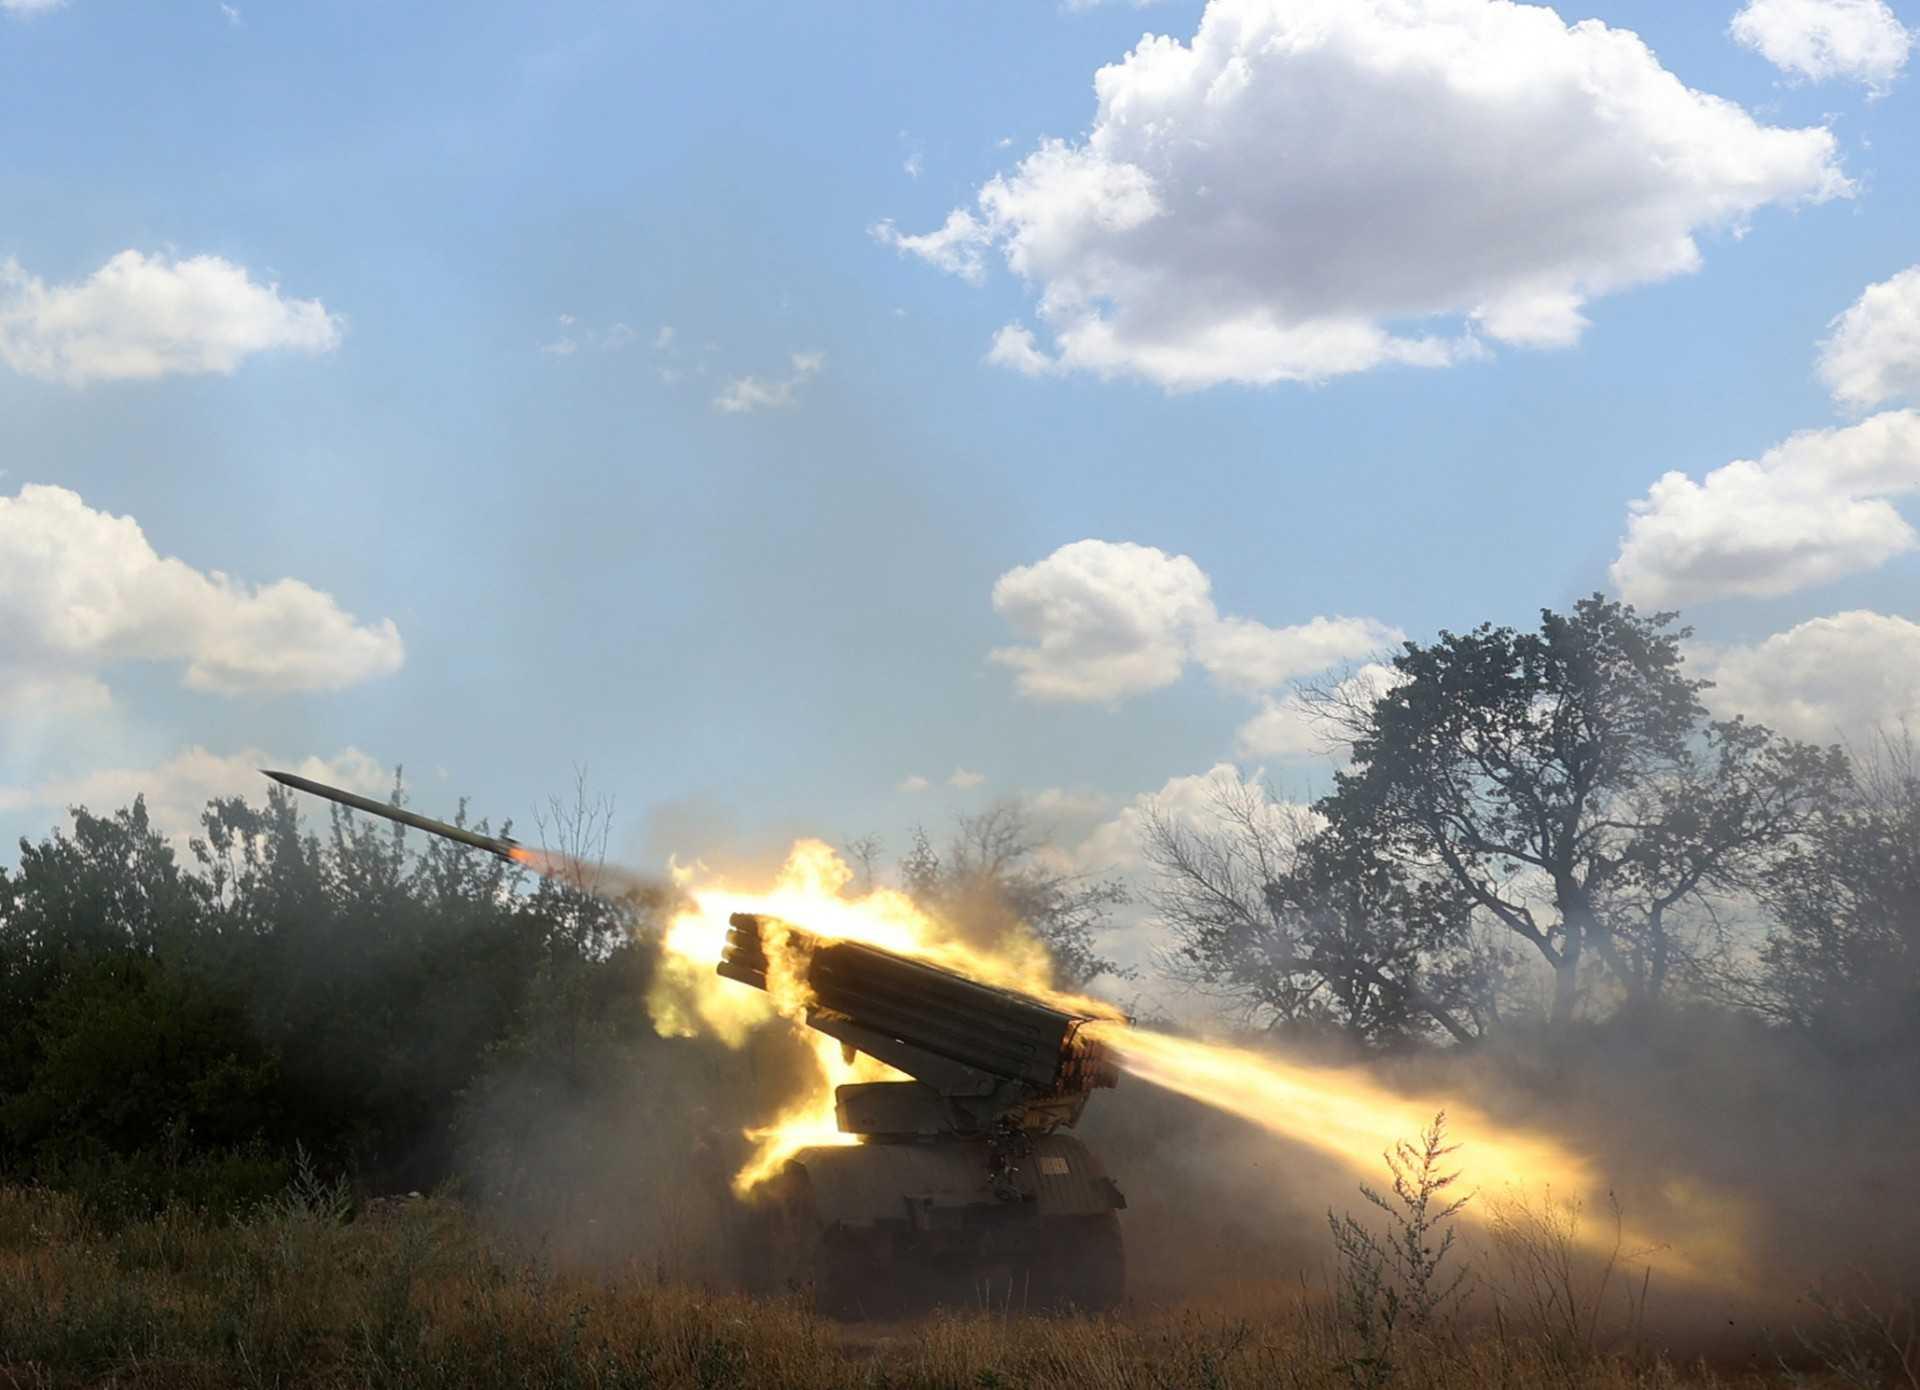 Ukrainian servicemen open fire on Russian positions with a Grad BM-21 multiple rocket launcher at the front line between Russian and Ukraine forces in the countryside of the eastern Ukrainian region of Donbas on July 19, amid the Russian invasion of Ukraine. Photo: AFP 